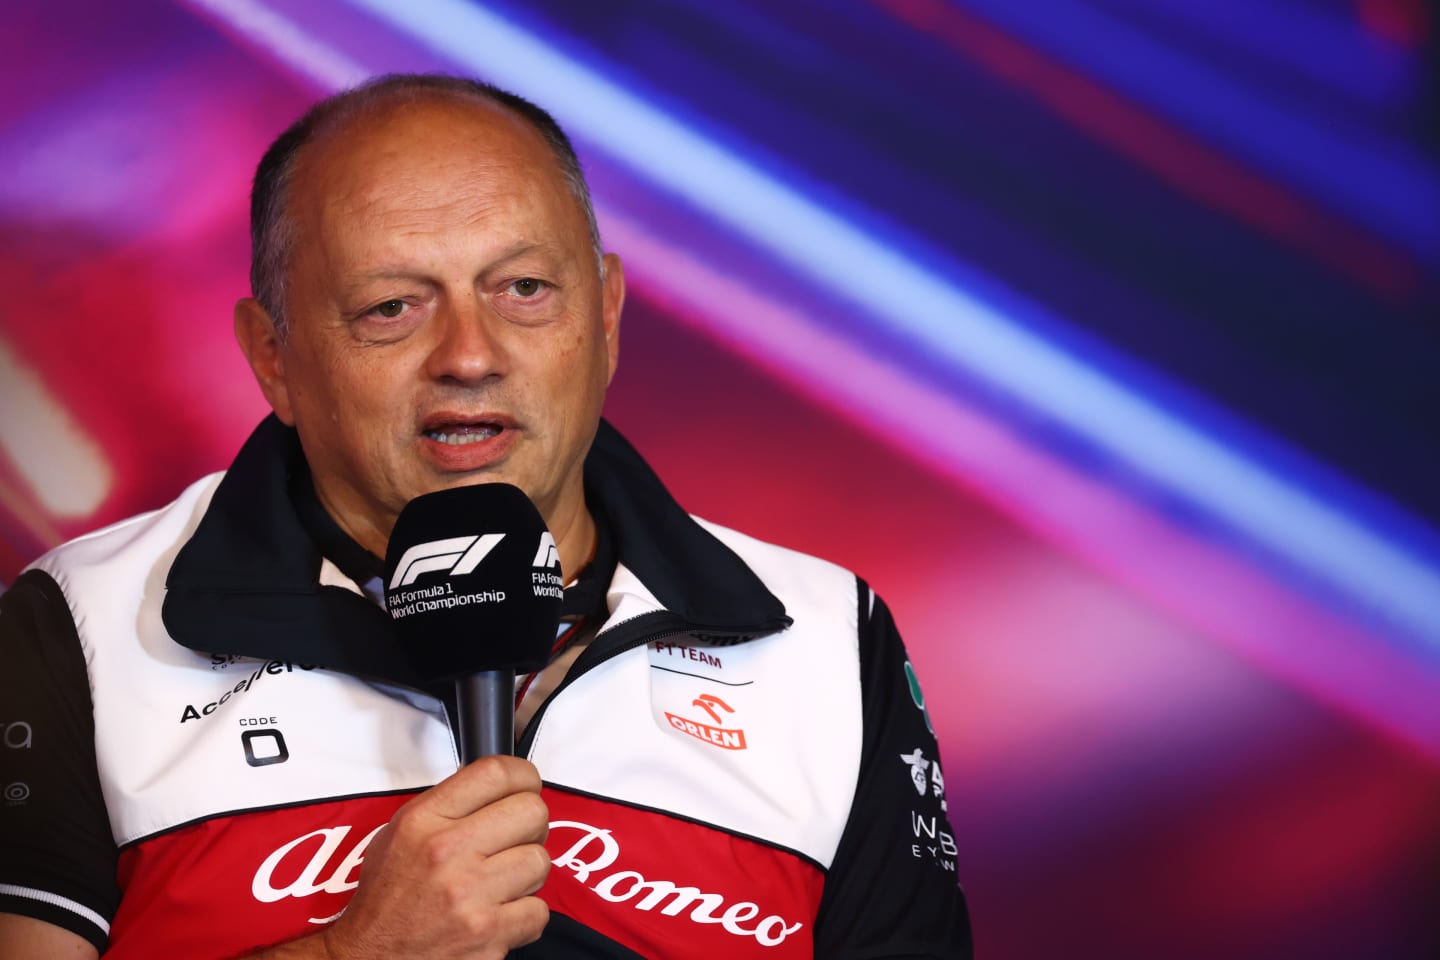 MONTREAL, QUEBEC - JUNE 18: Alfa Romeo Racing Team Principal Frederic Vasseur talks in the Team Principals Press Conference prior to final practice ahead of the F1 Grand Prix of Canada at Circuit Gilles Villeneuve on June 18, 2022 in Montreal, Quebec. (Photo by Dan Istitene/Getty Images)